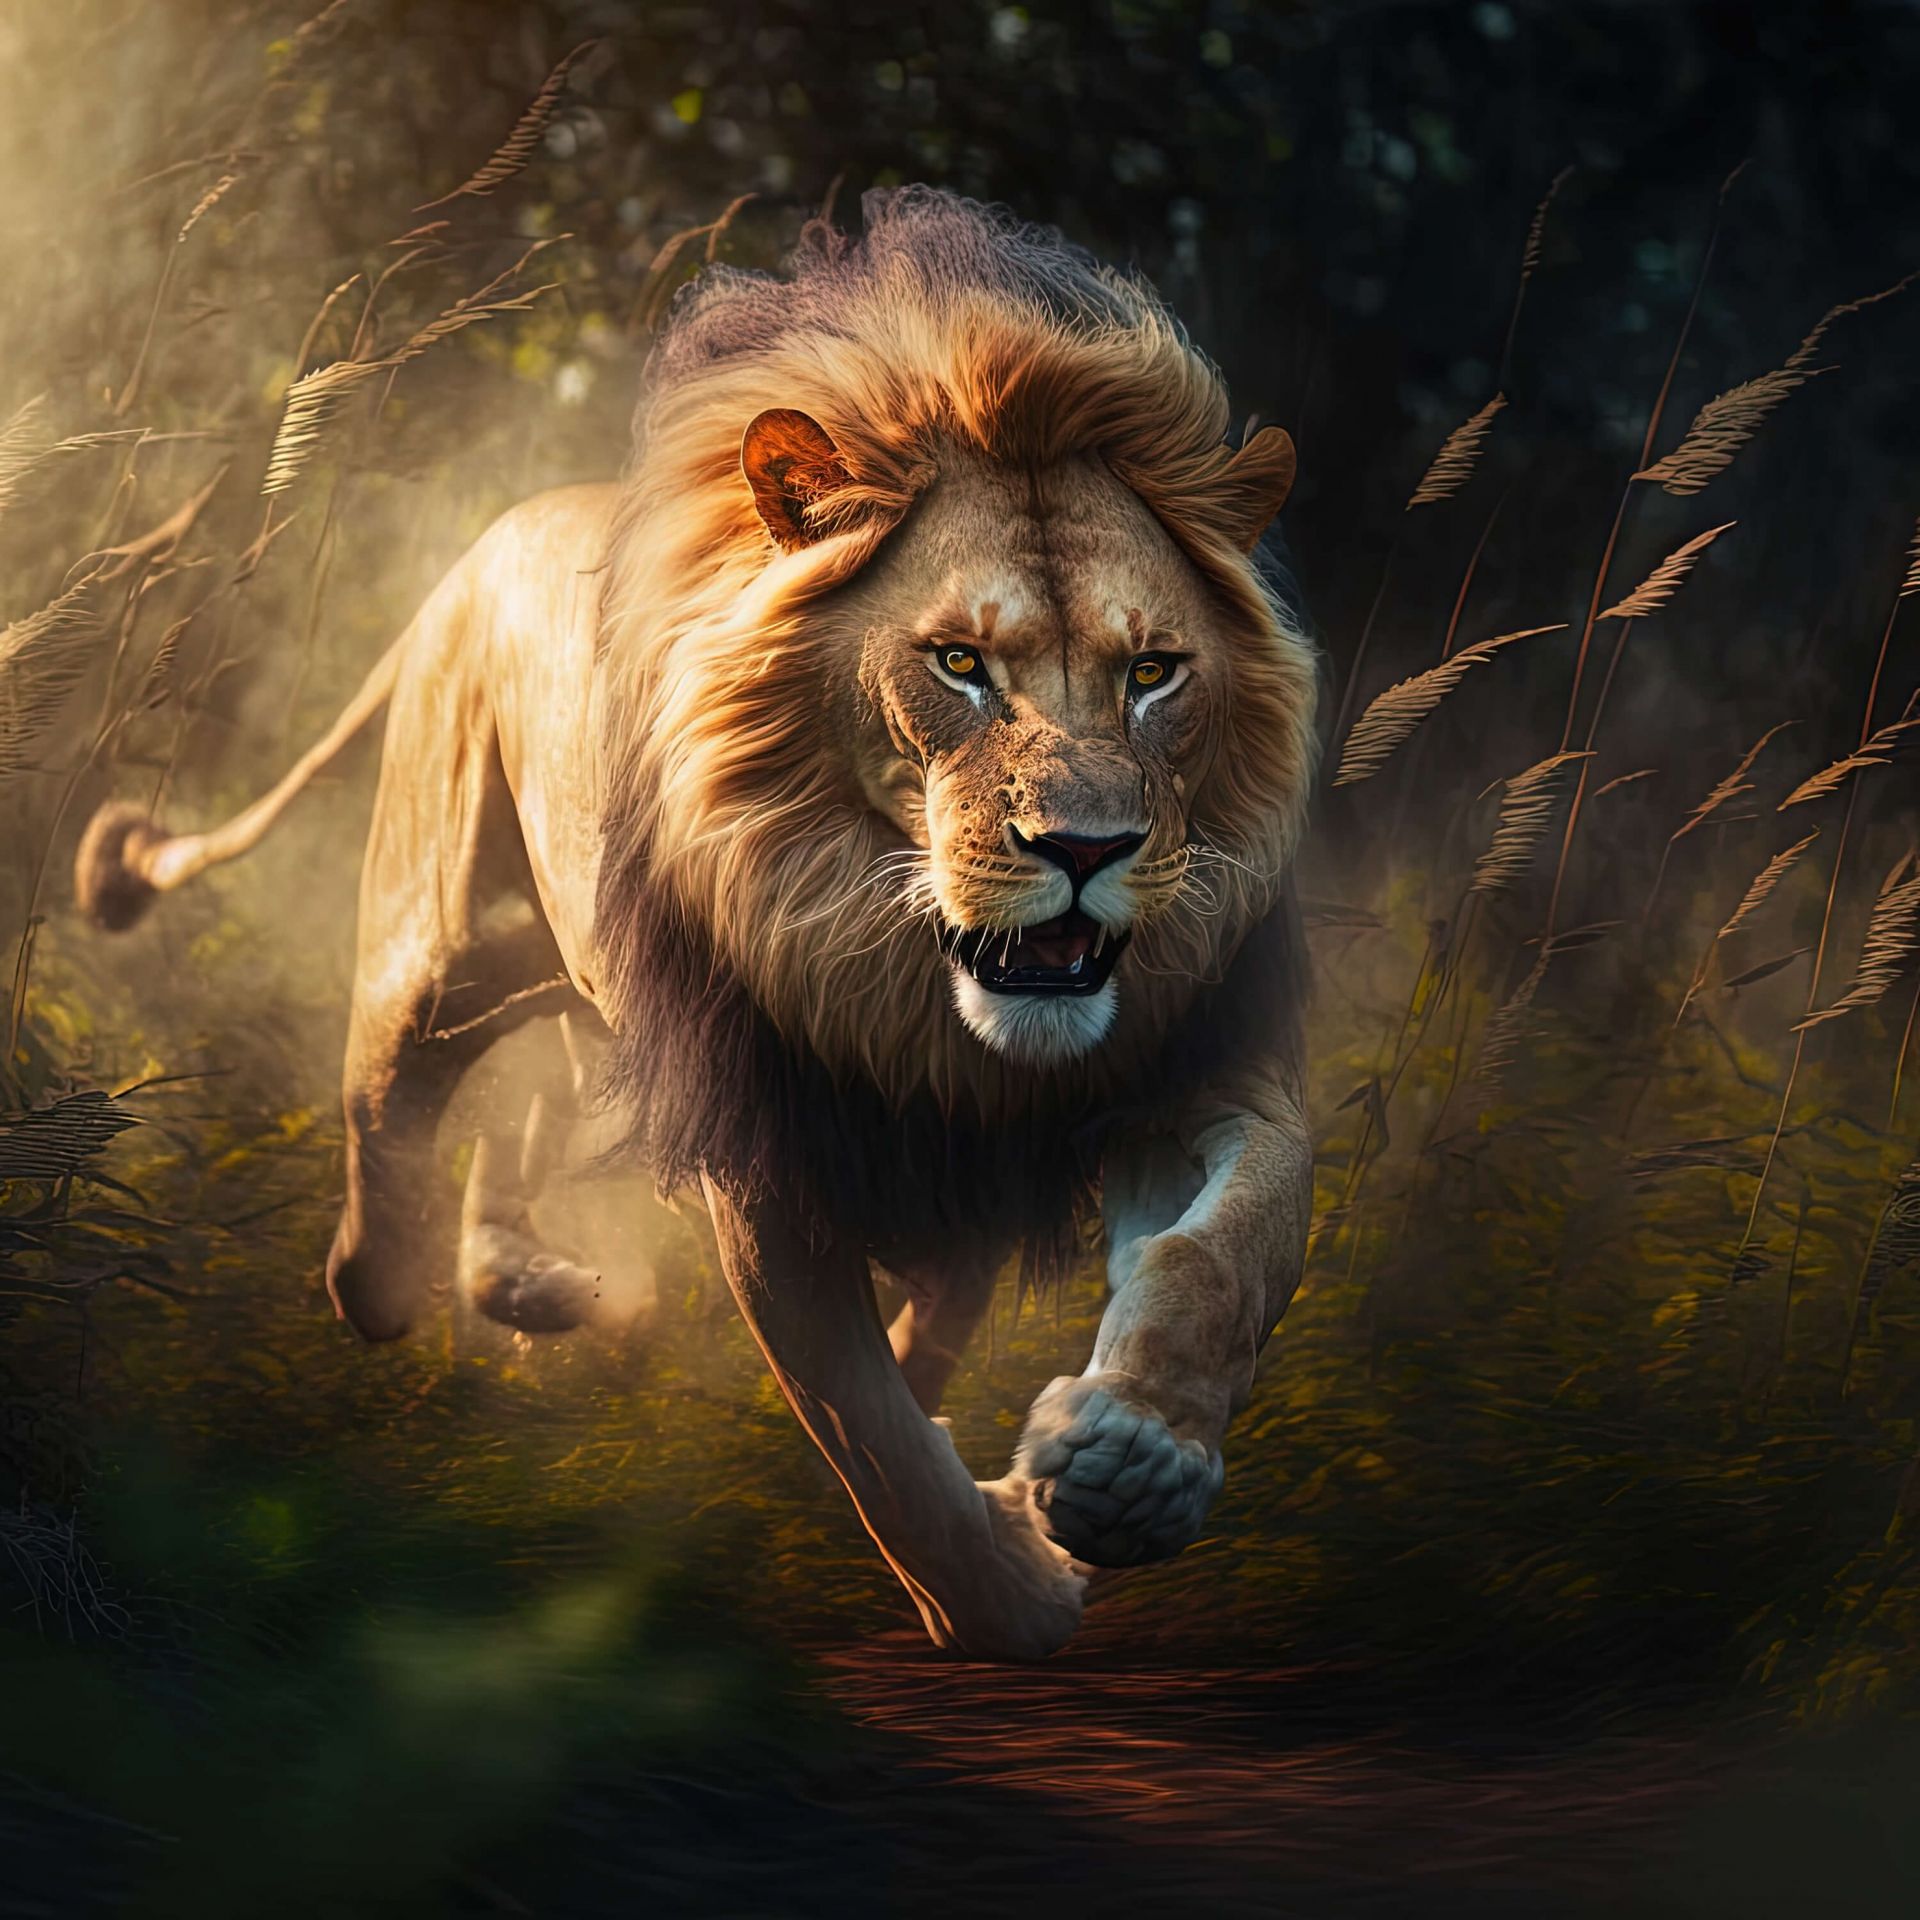 Download Lion Yellow wallpaper by Florian_Hari - 8f - Free on ZEDGE™ now.  Browse millions of popular animal Wal… | Lion wallpaper, Lion artwork, Lion  live wallpaper